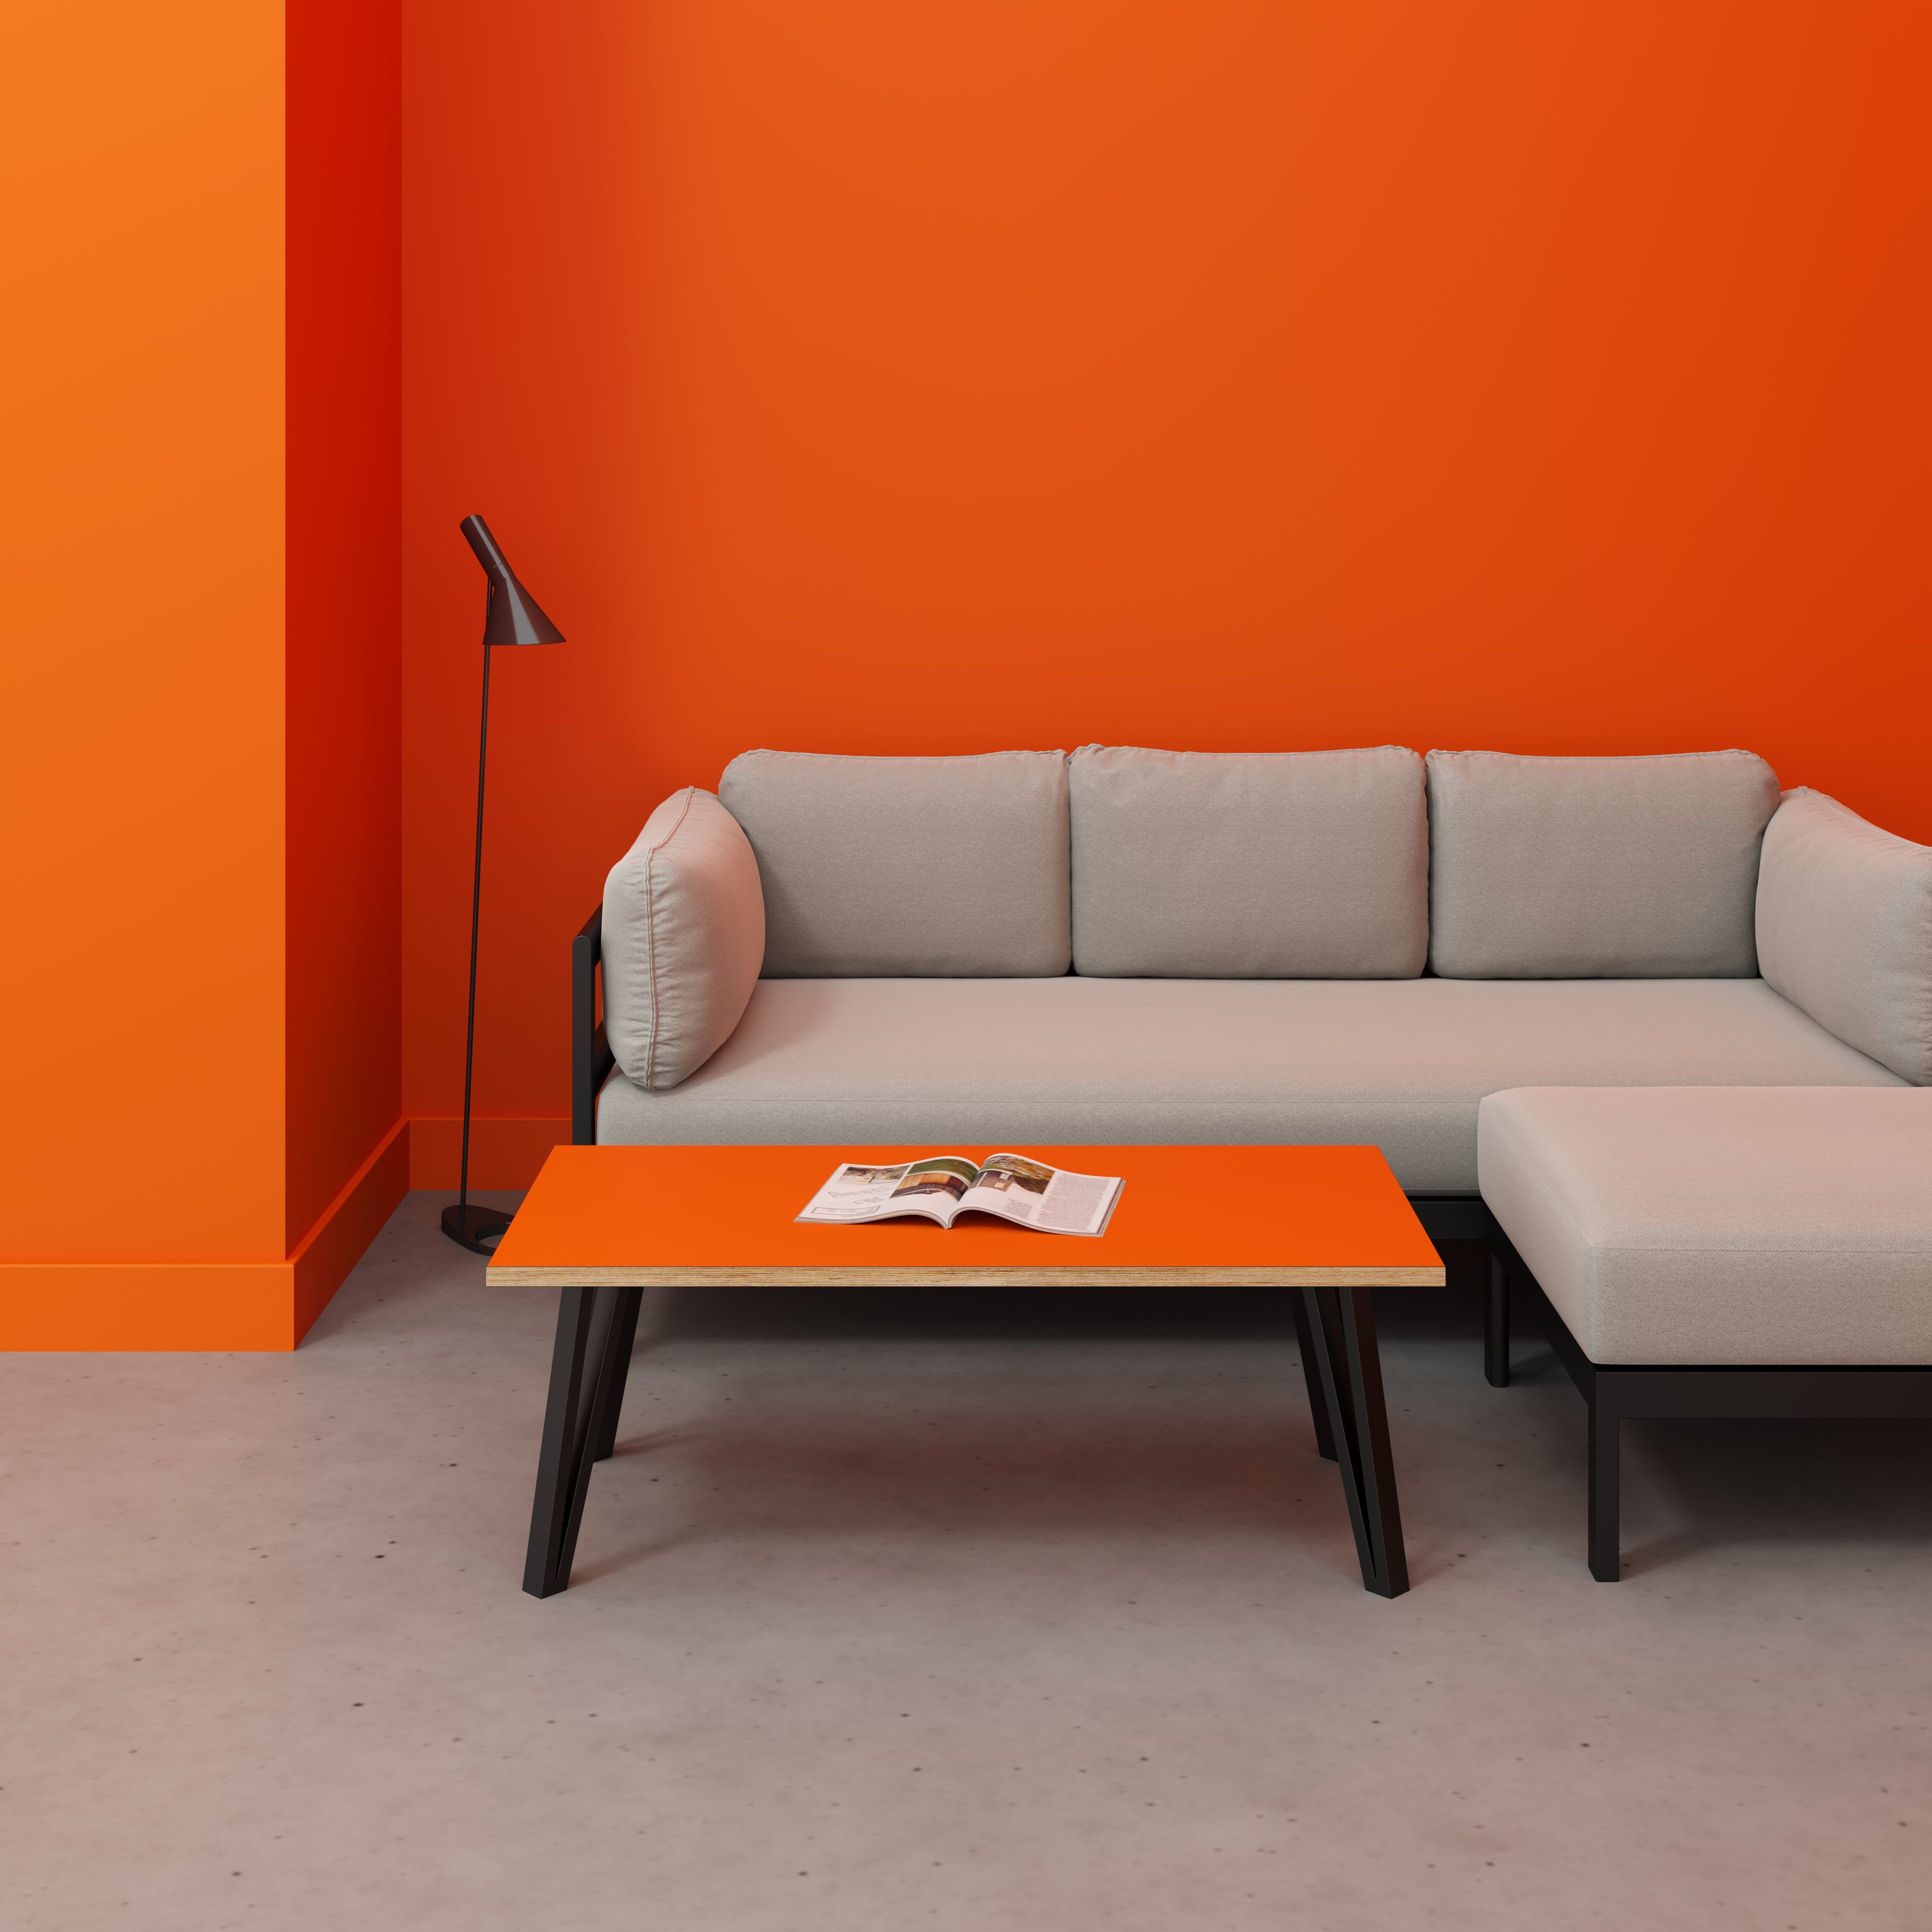 Coffee Table with Black Box Hairpin Legs - Formica Levante Orange - 1200(w) x 600(d) x 425(h)